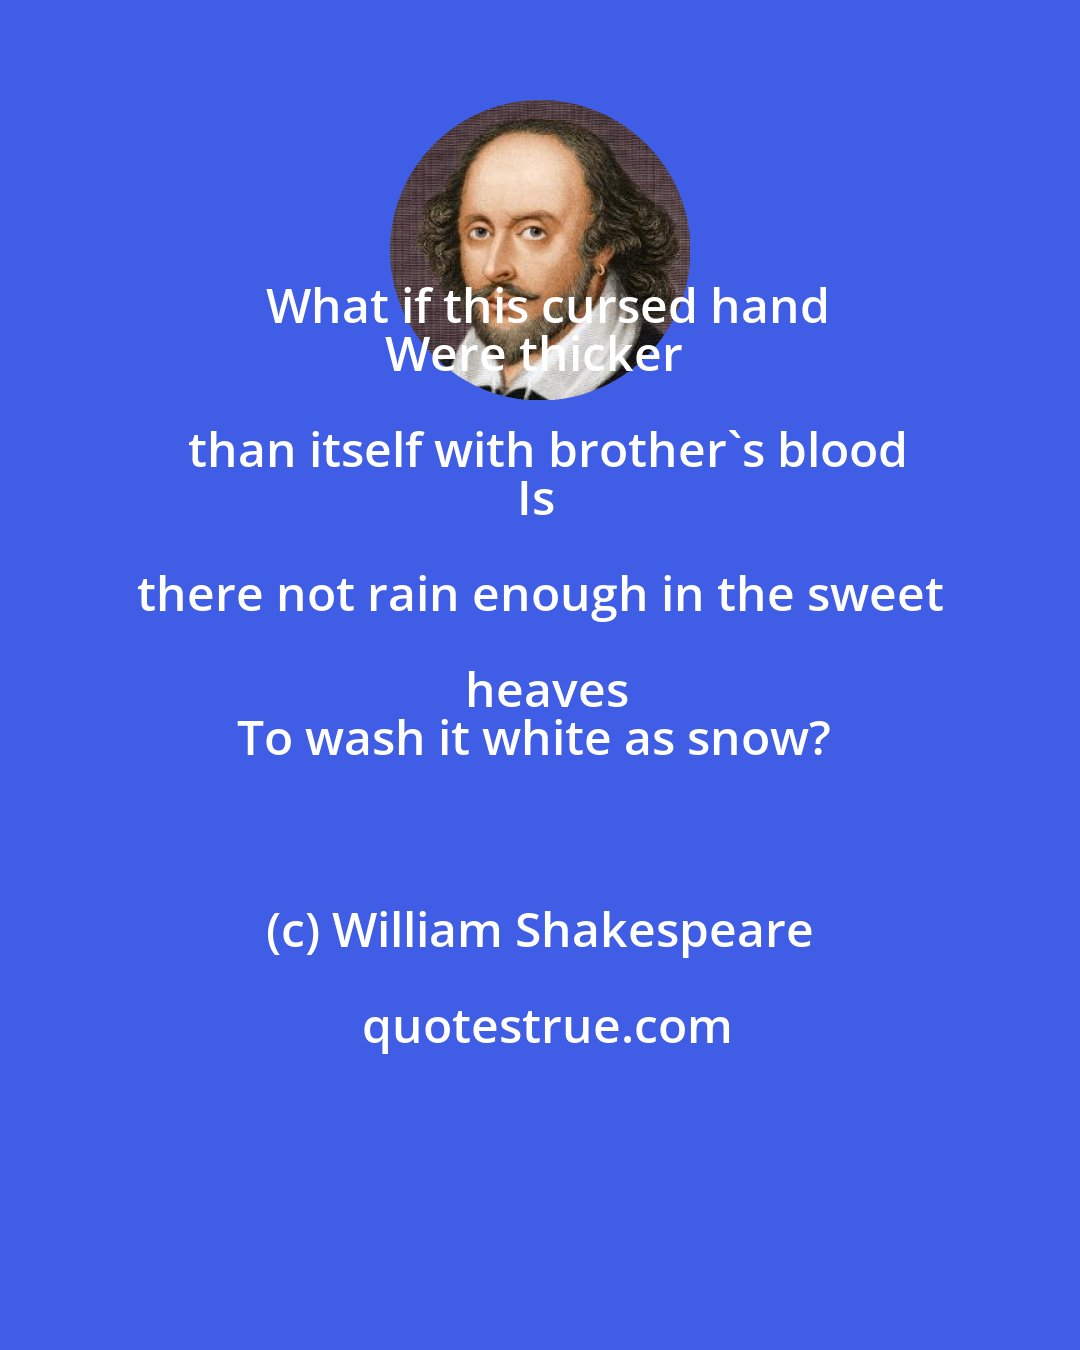 William Shakespeare: What if this cursed hand
Were thicker than itself with brother's blood
Is there not rain enough in the sweet heaves
To wash it white as snow?